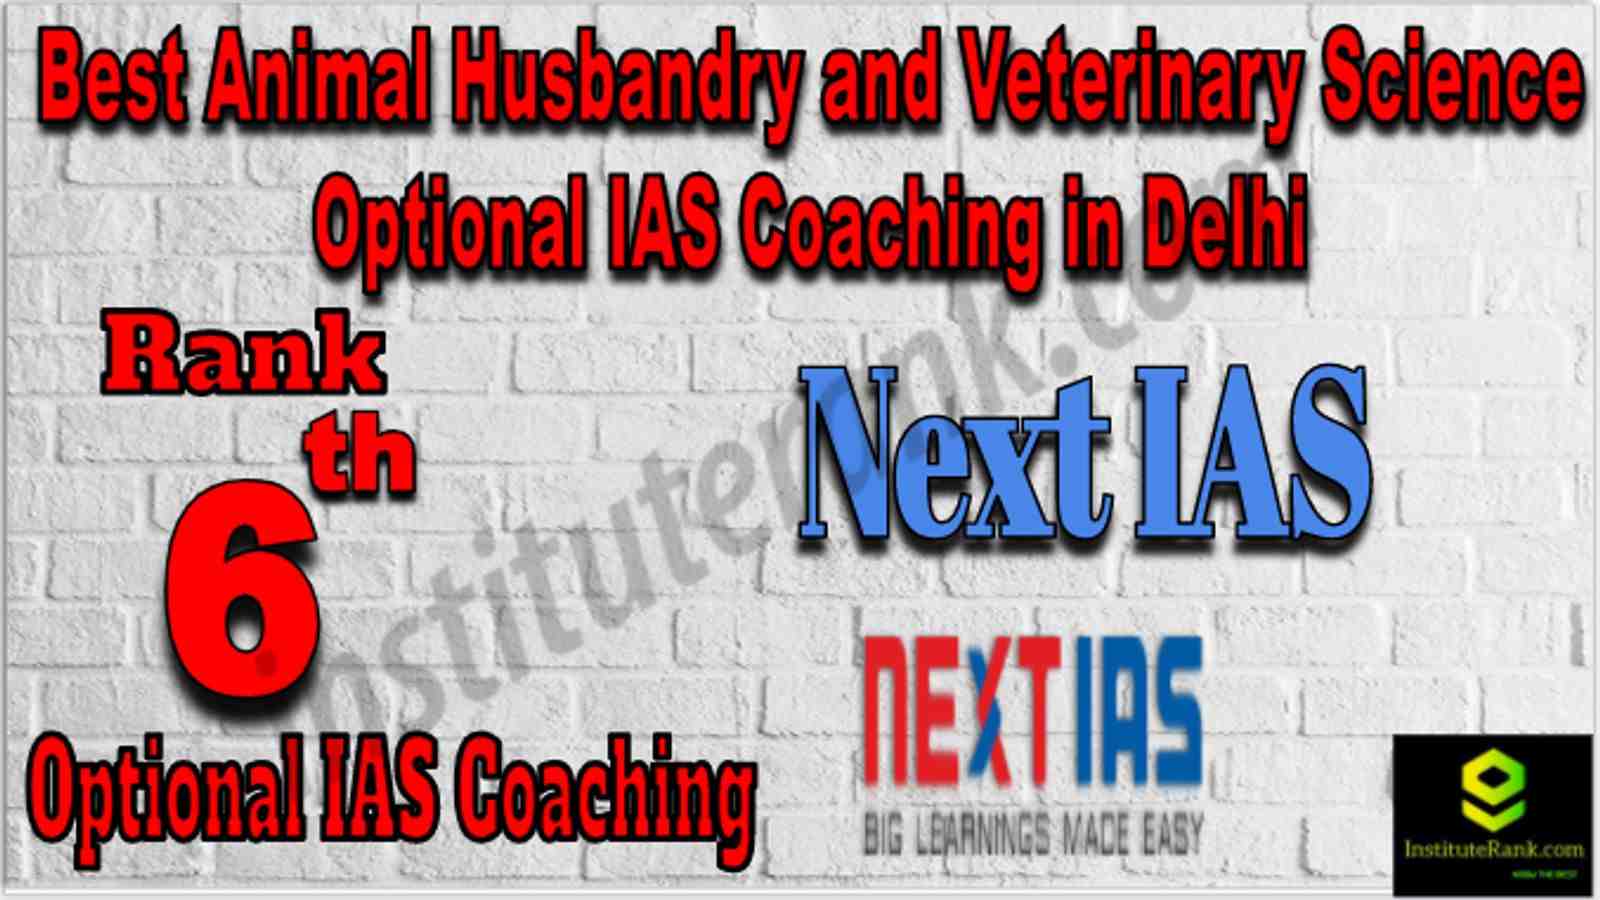 Best Animal Husbandry and Veterinary Science Optional IAS Coaching in Delhi